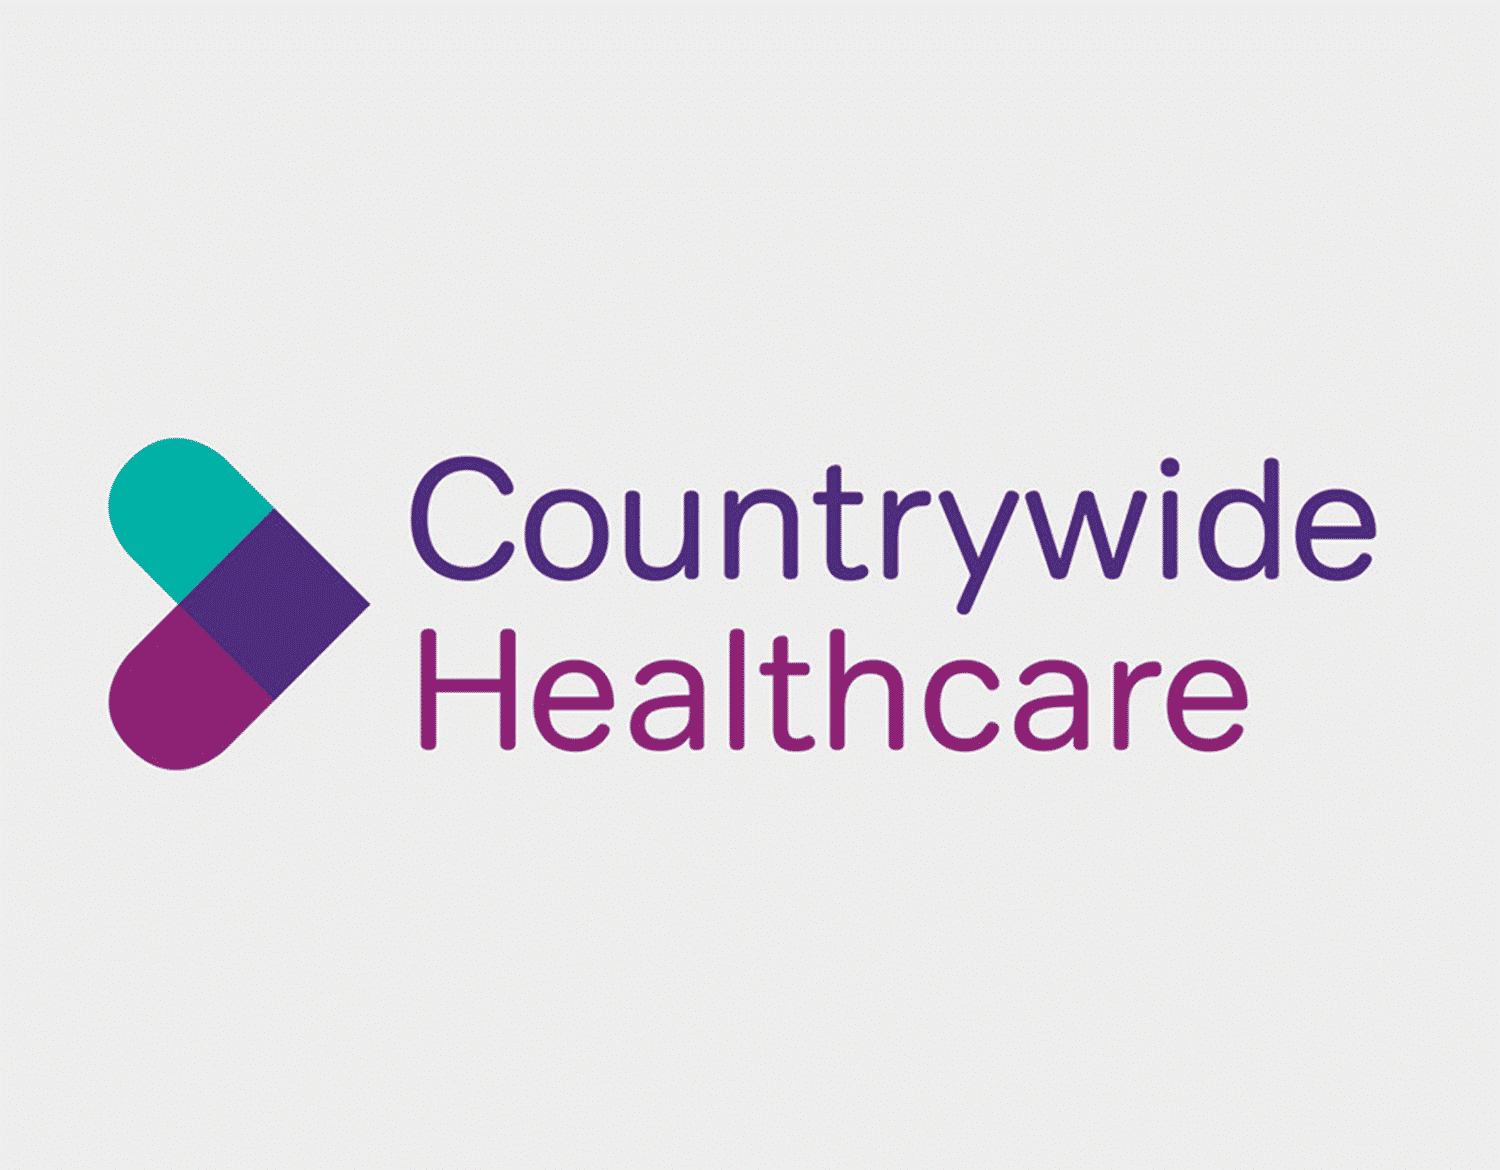 Countrywide Healthcare - Much more as standard